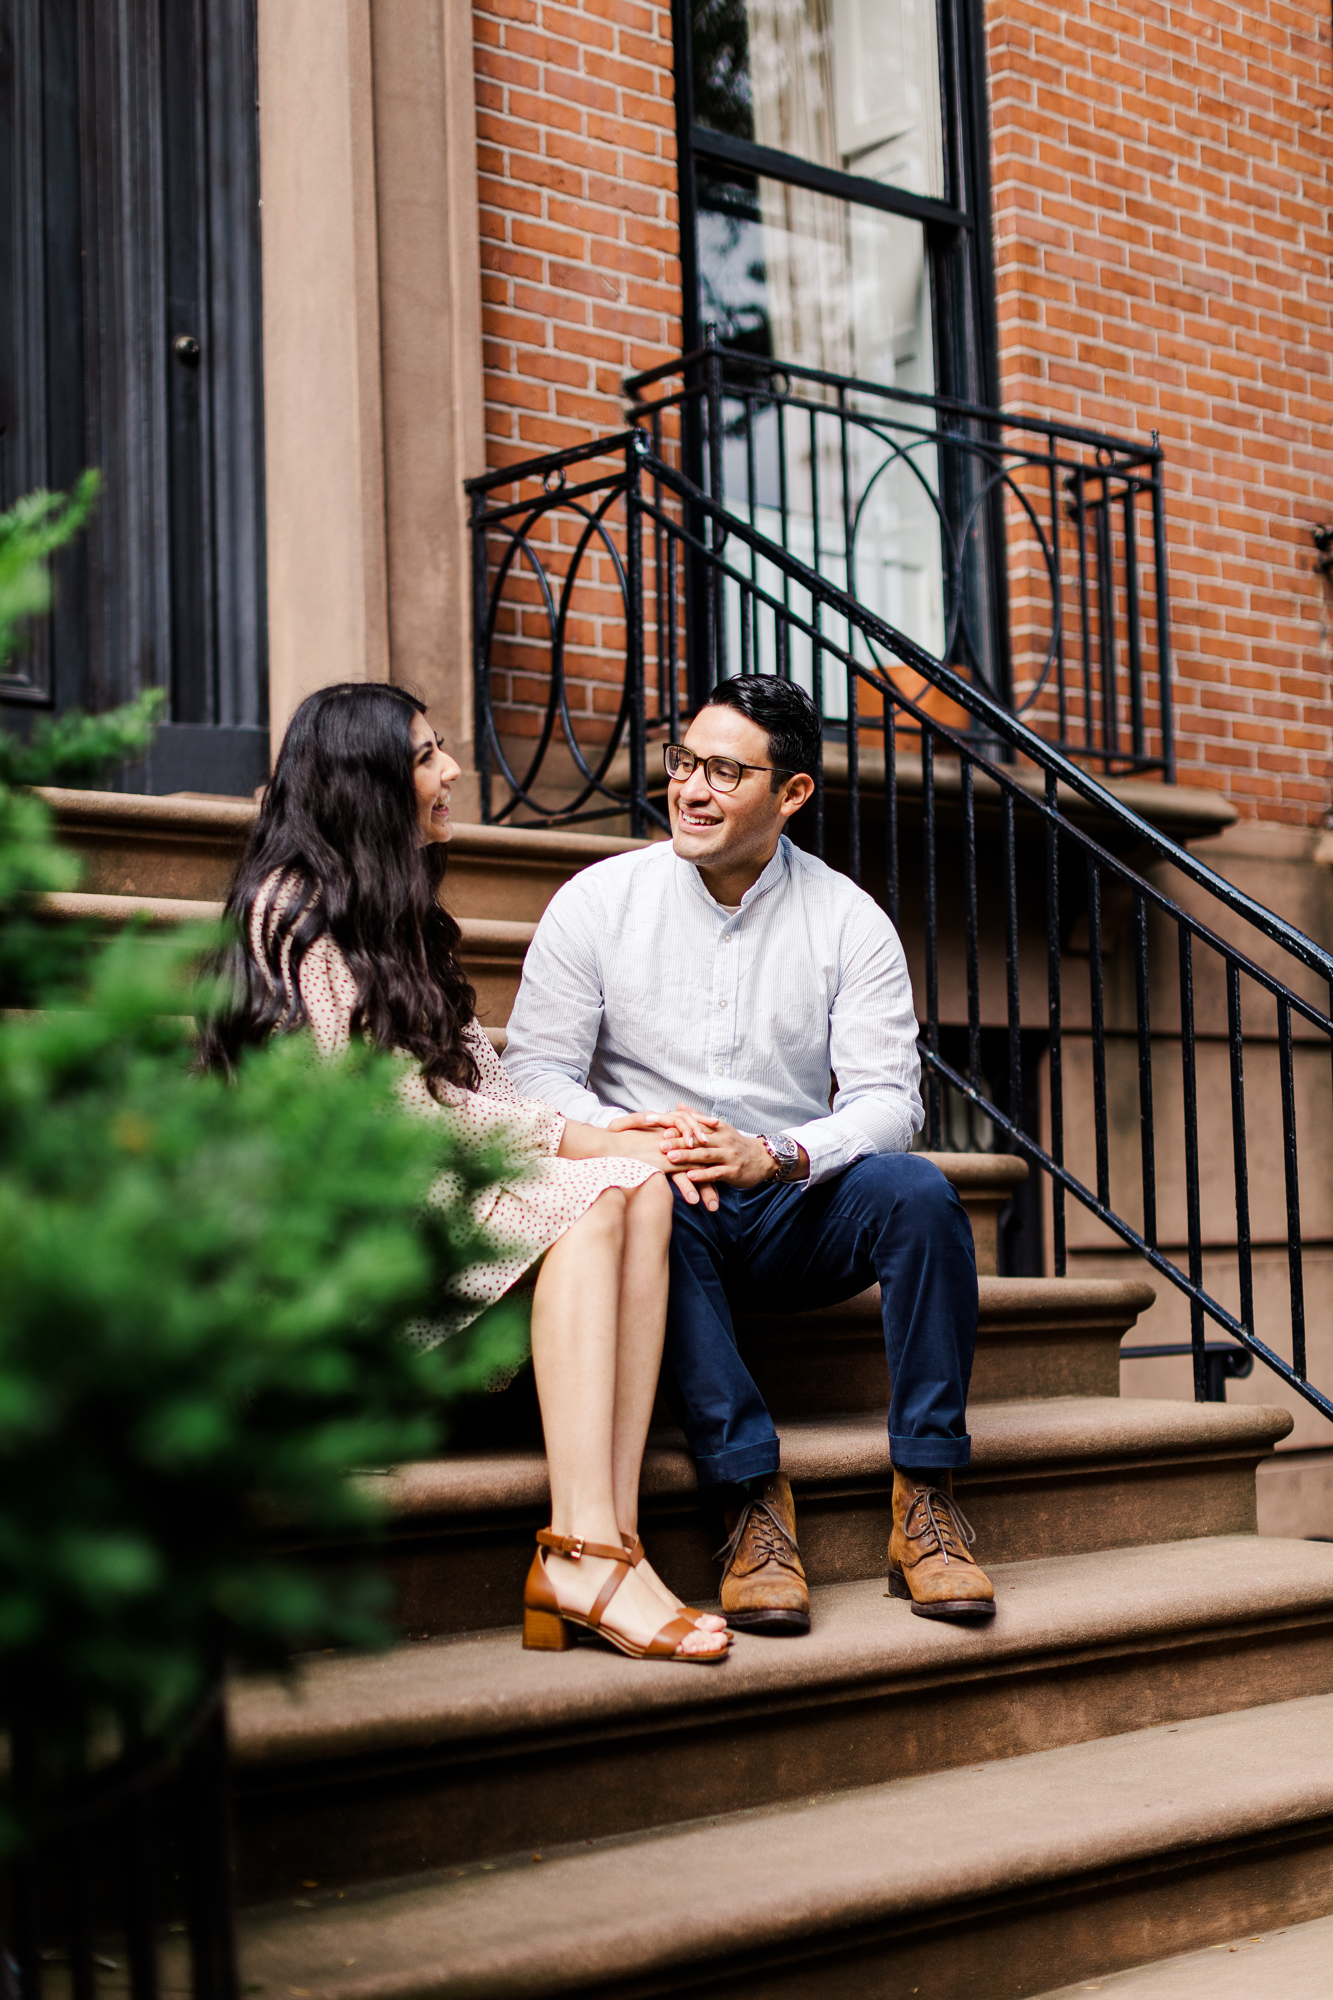 Charming Brooklyn Heights Promenade Engagement Photography